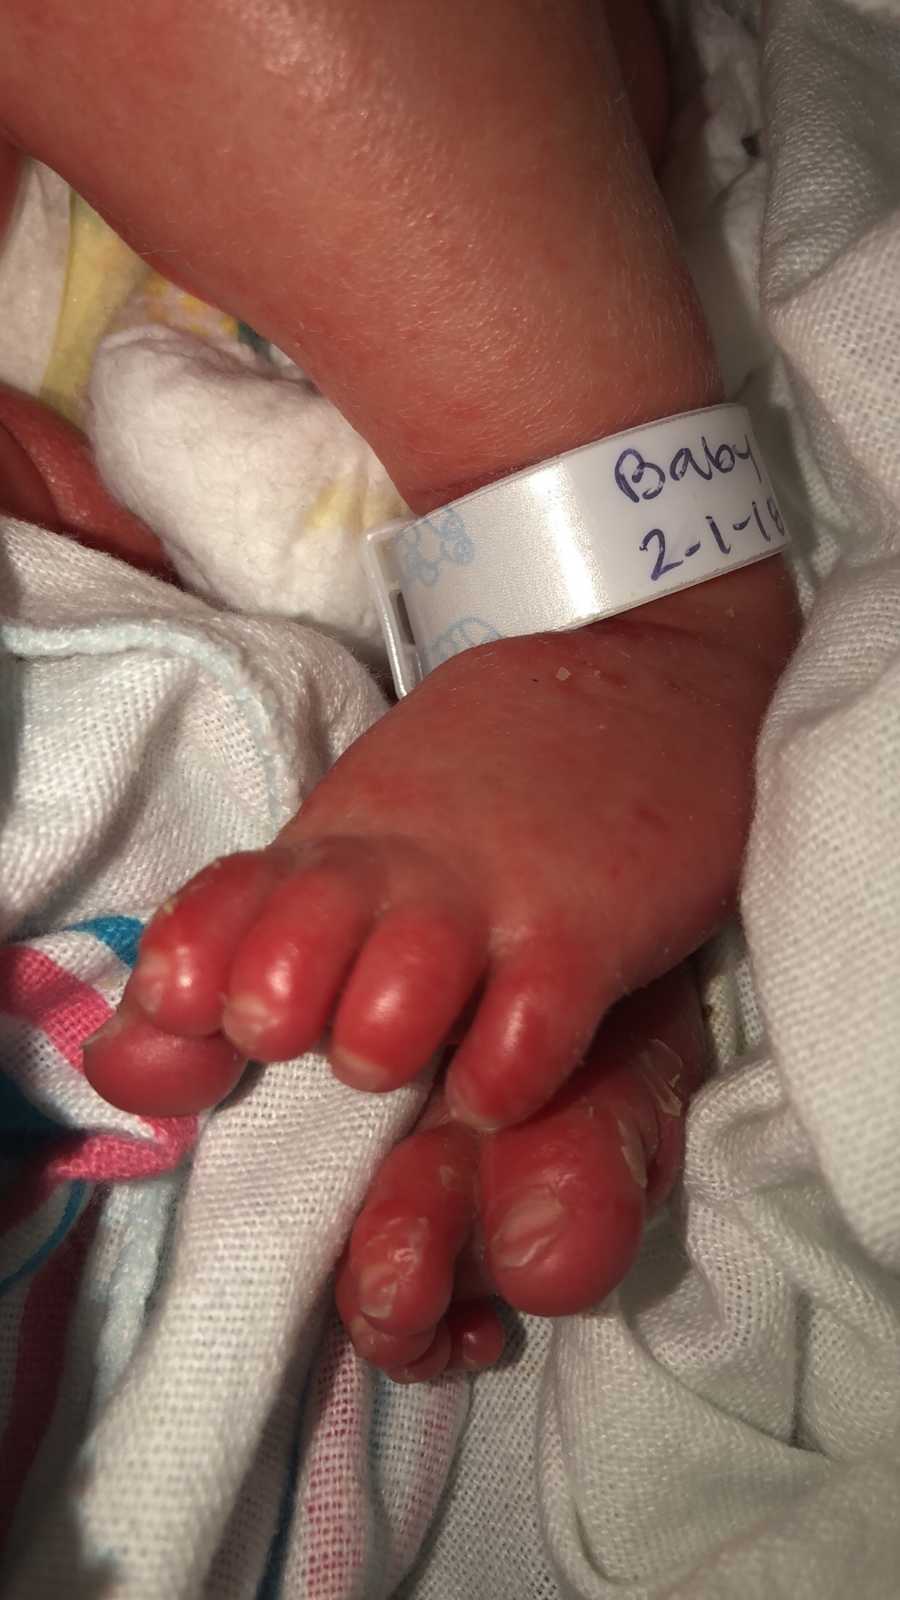 Close up of newborn's feet who has Ichthyosis